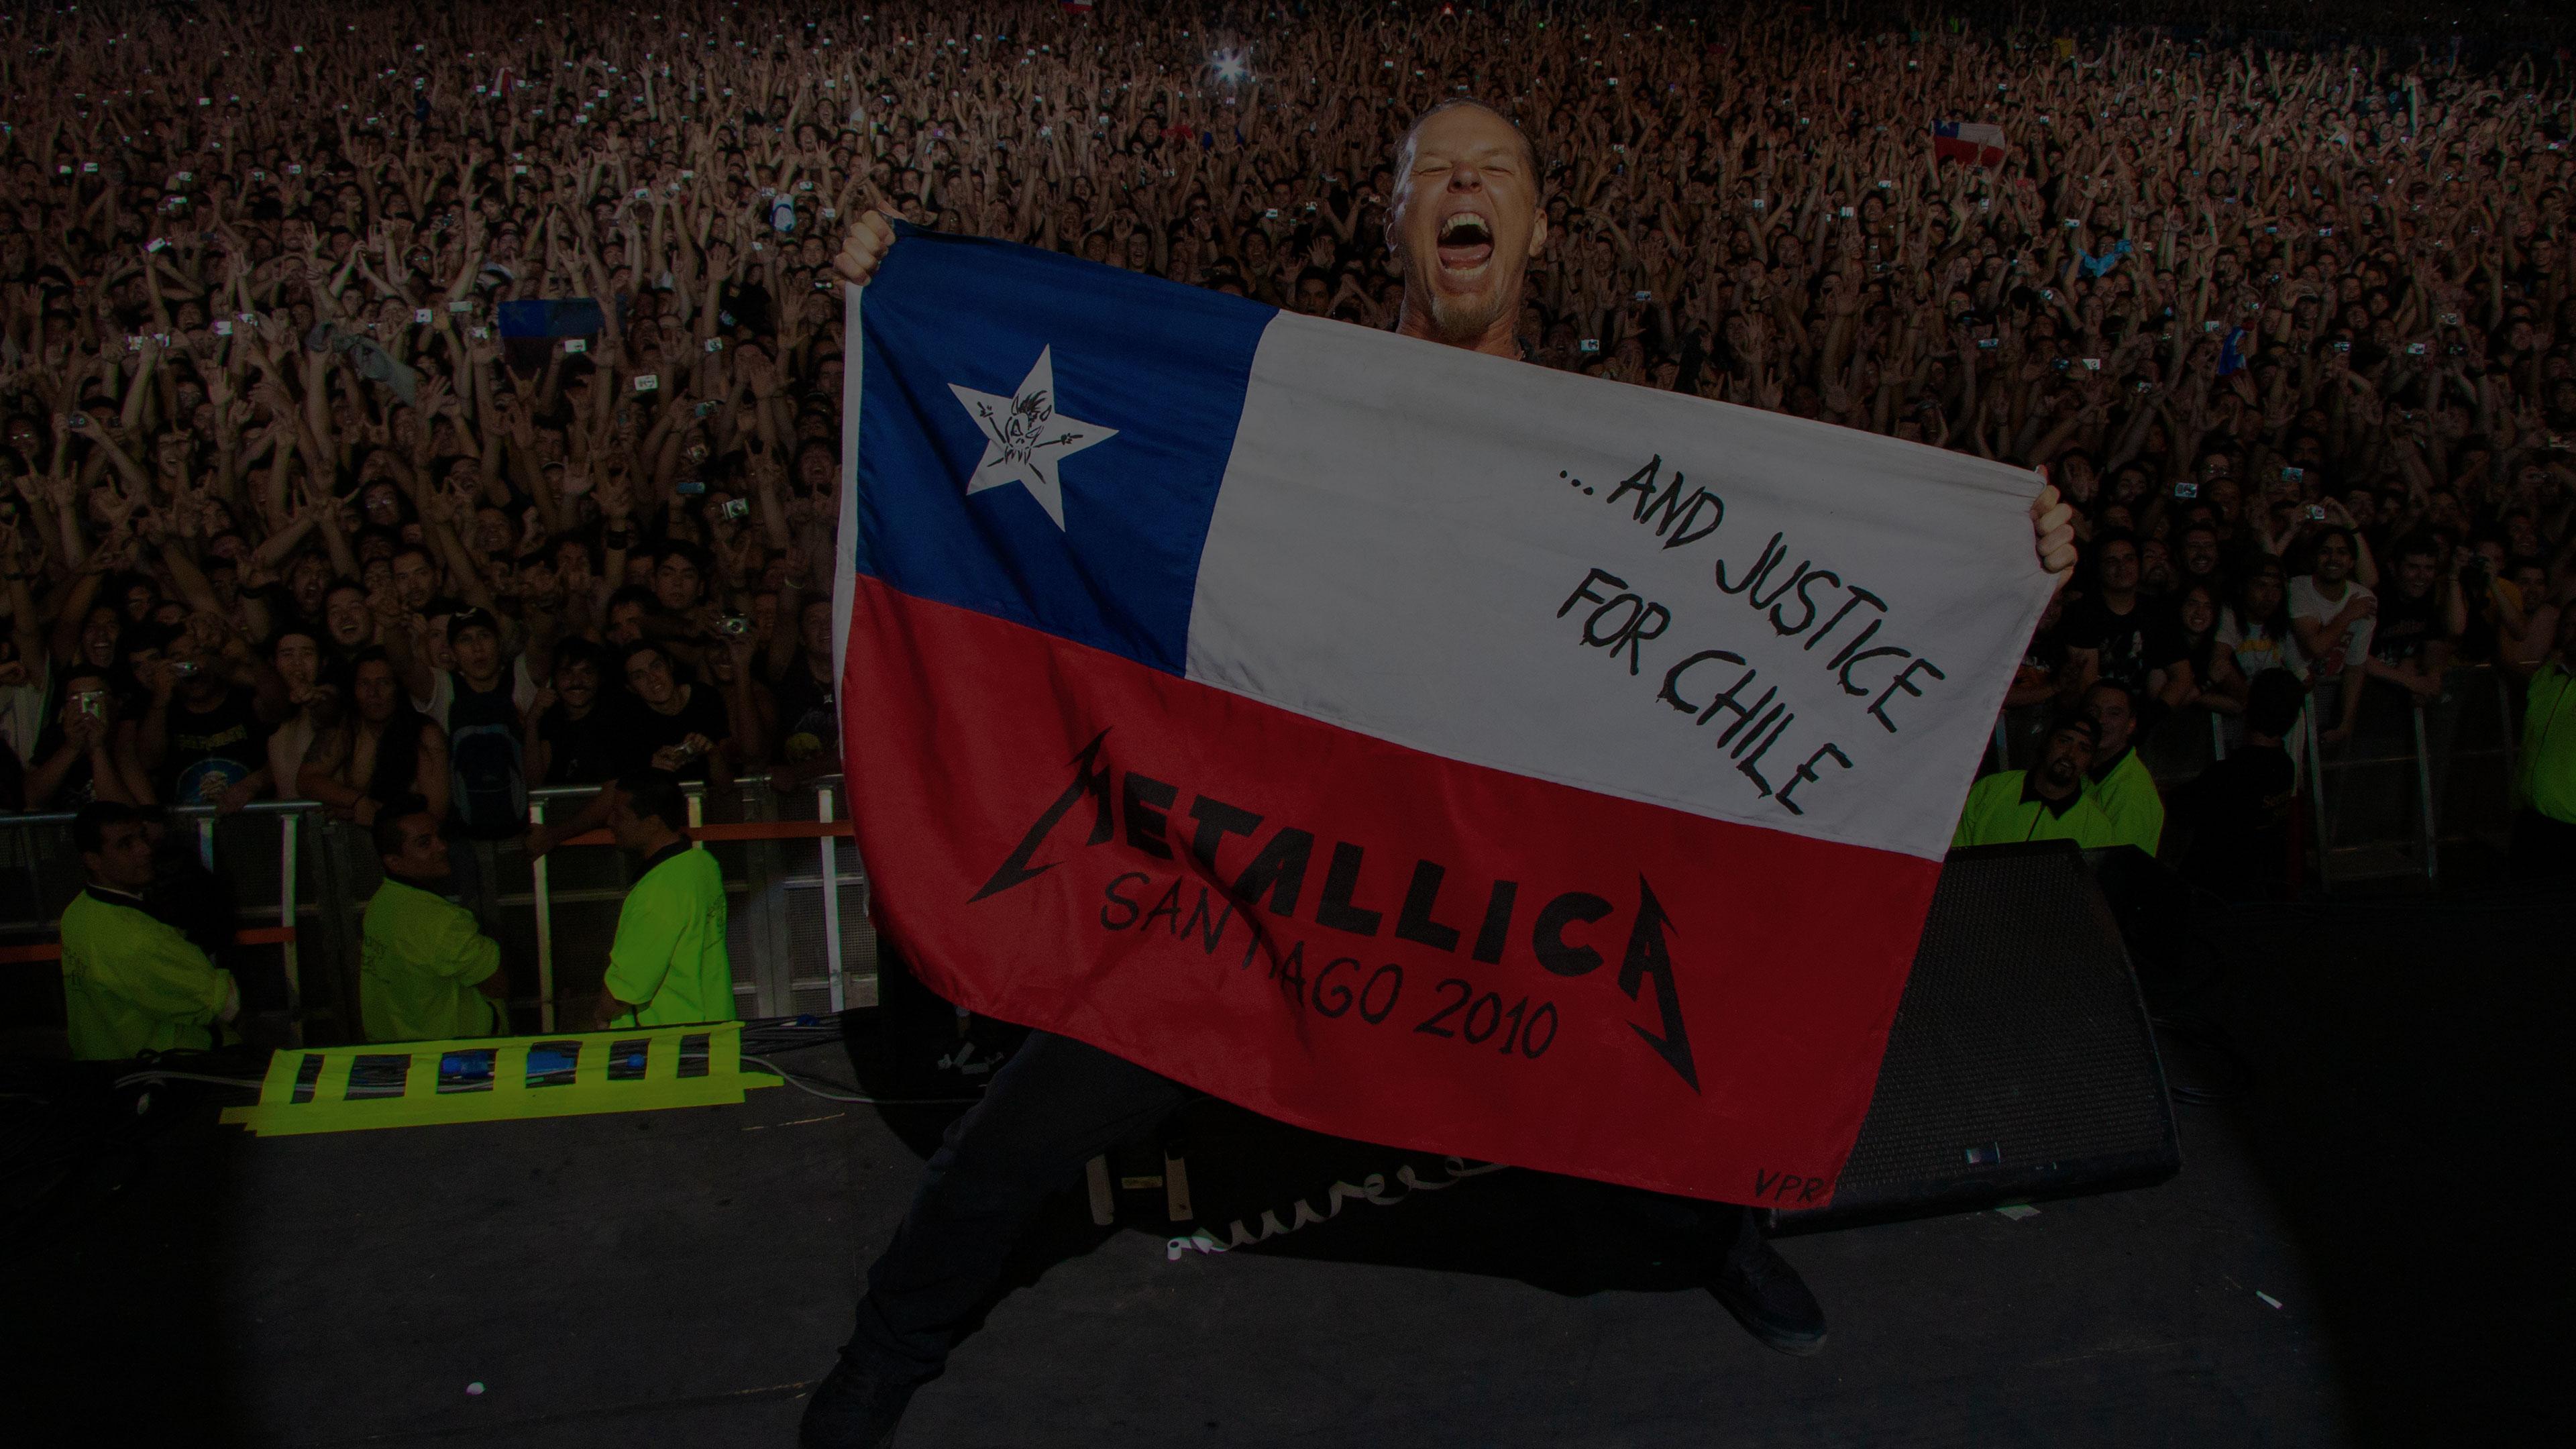 Metallica at Club Hípico in Santiago, Chile on January 26, 2010